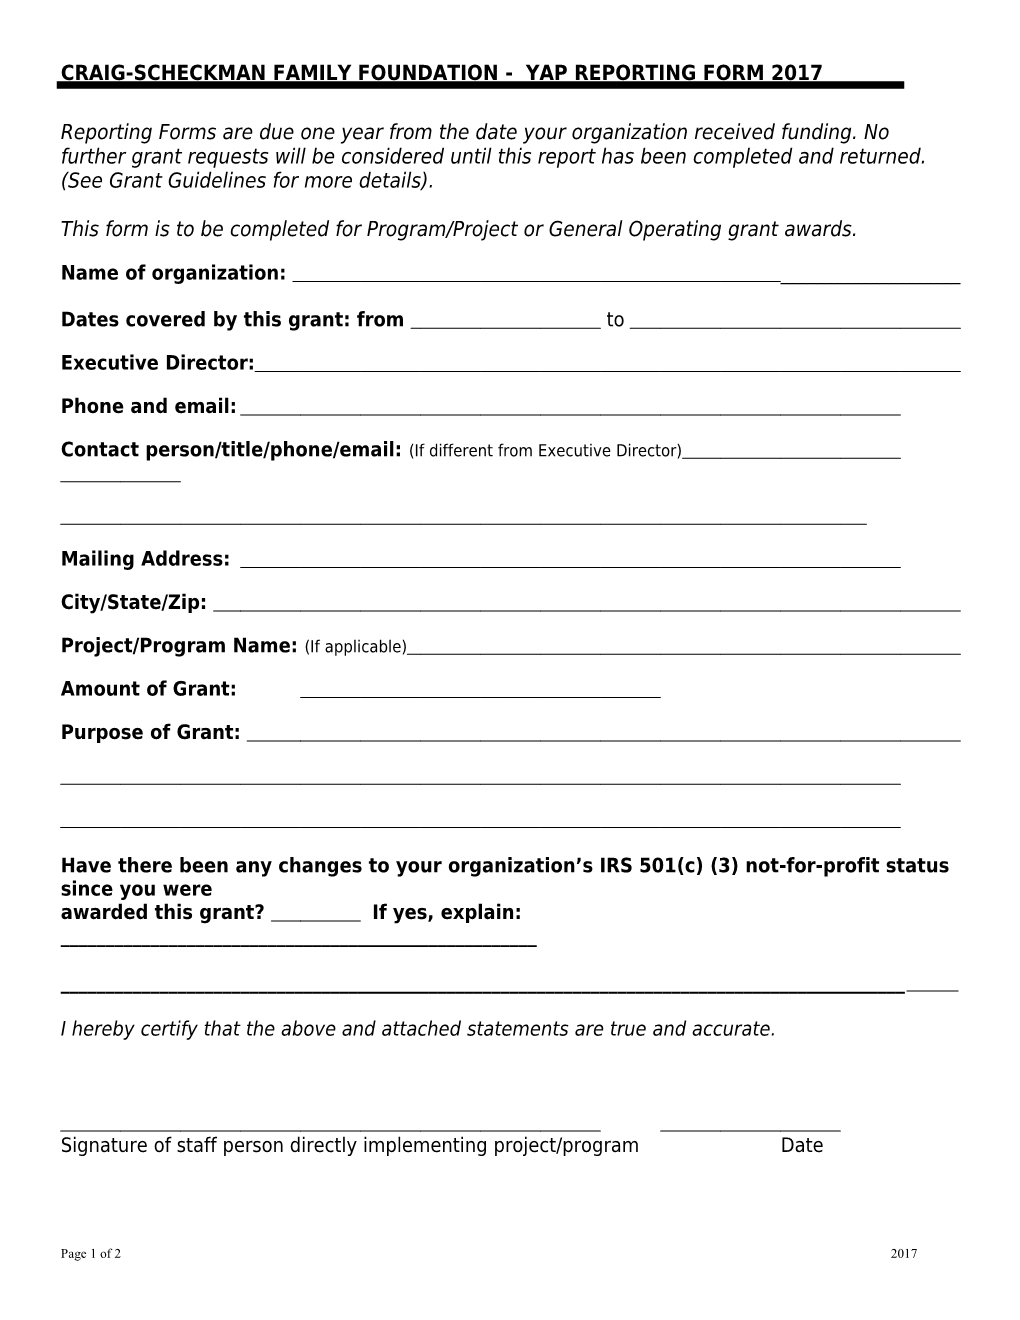 Craig-Scheckman Family Foundation - Yap Reporting Form 2017